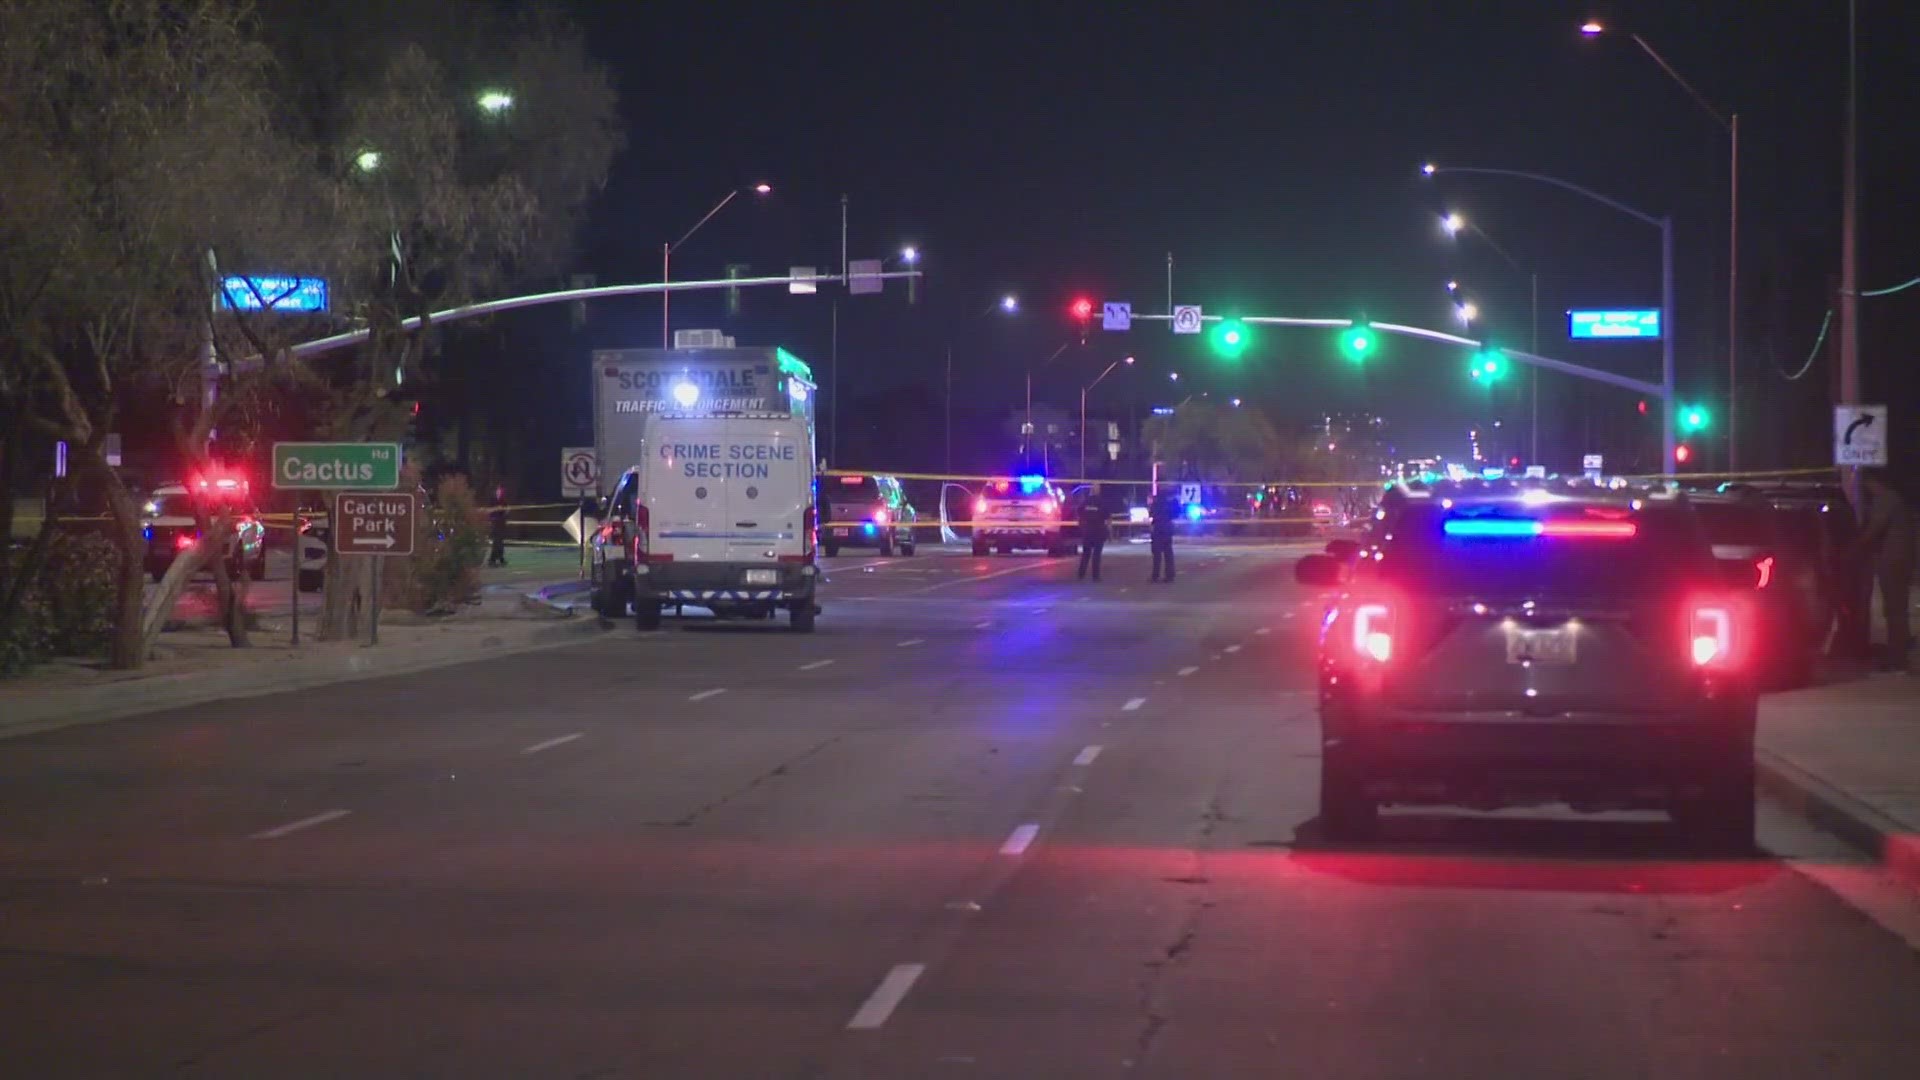 The Scottsdale Police Department said the shooting happened at around 5:30 p.m. near the intersection of Scottsdale and Cactus roads when officers tried to stop the